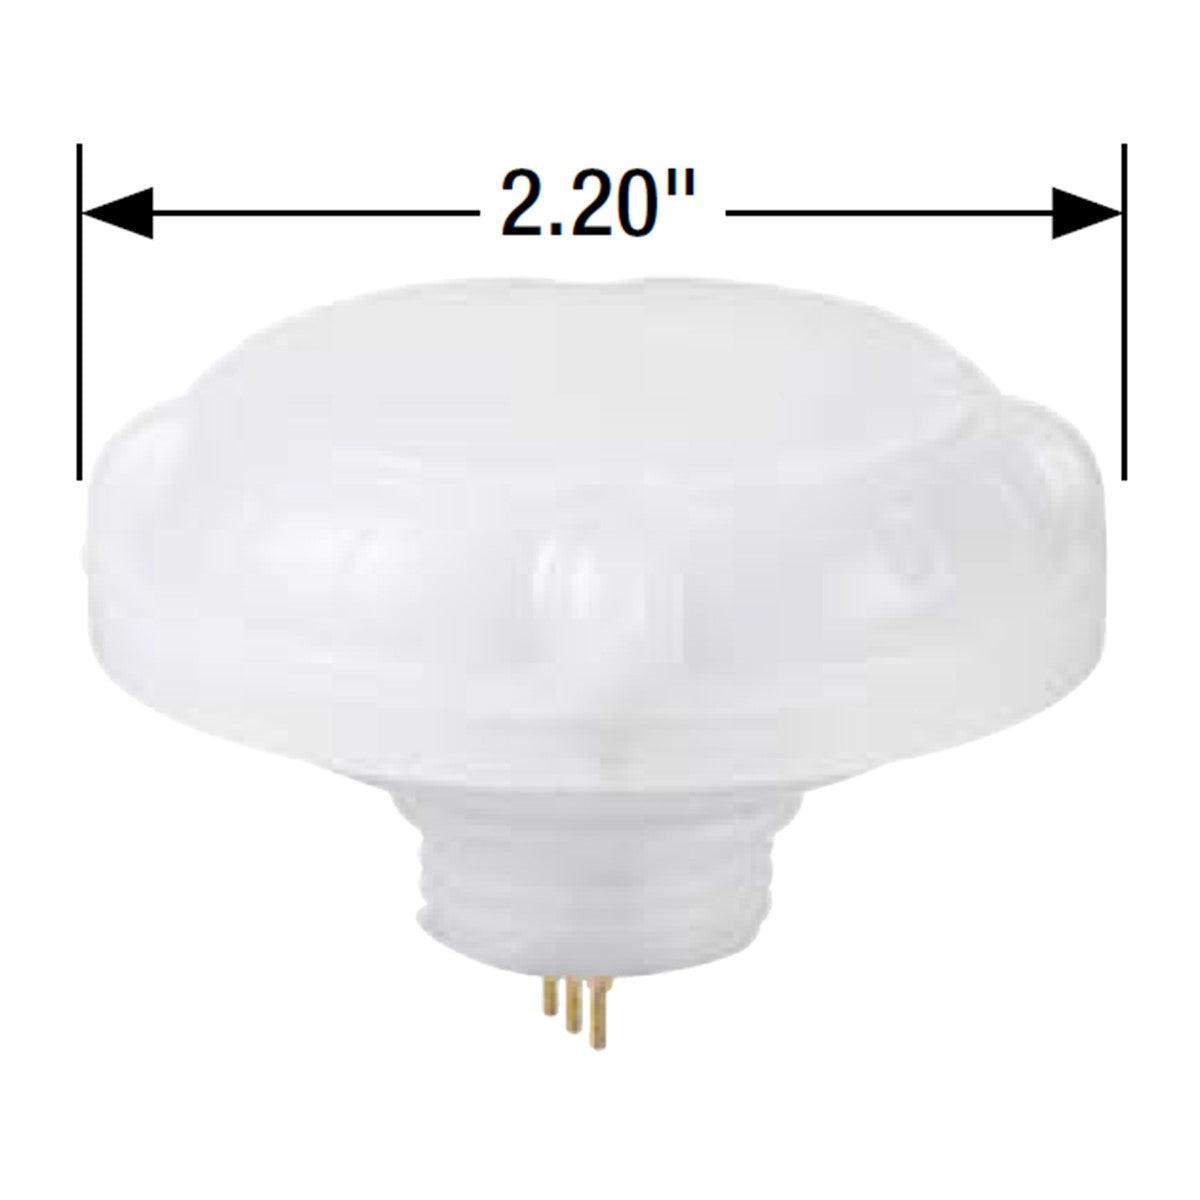 Sylvania High Bay Mircrowave Motion/Daylight Sensor, Remote Required To Change Default Settings - Bees Lighting